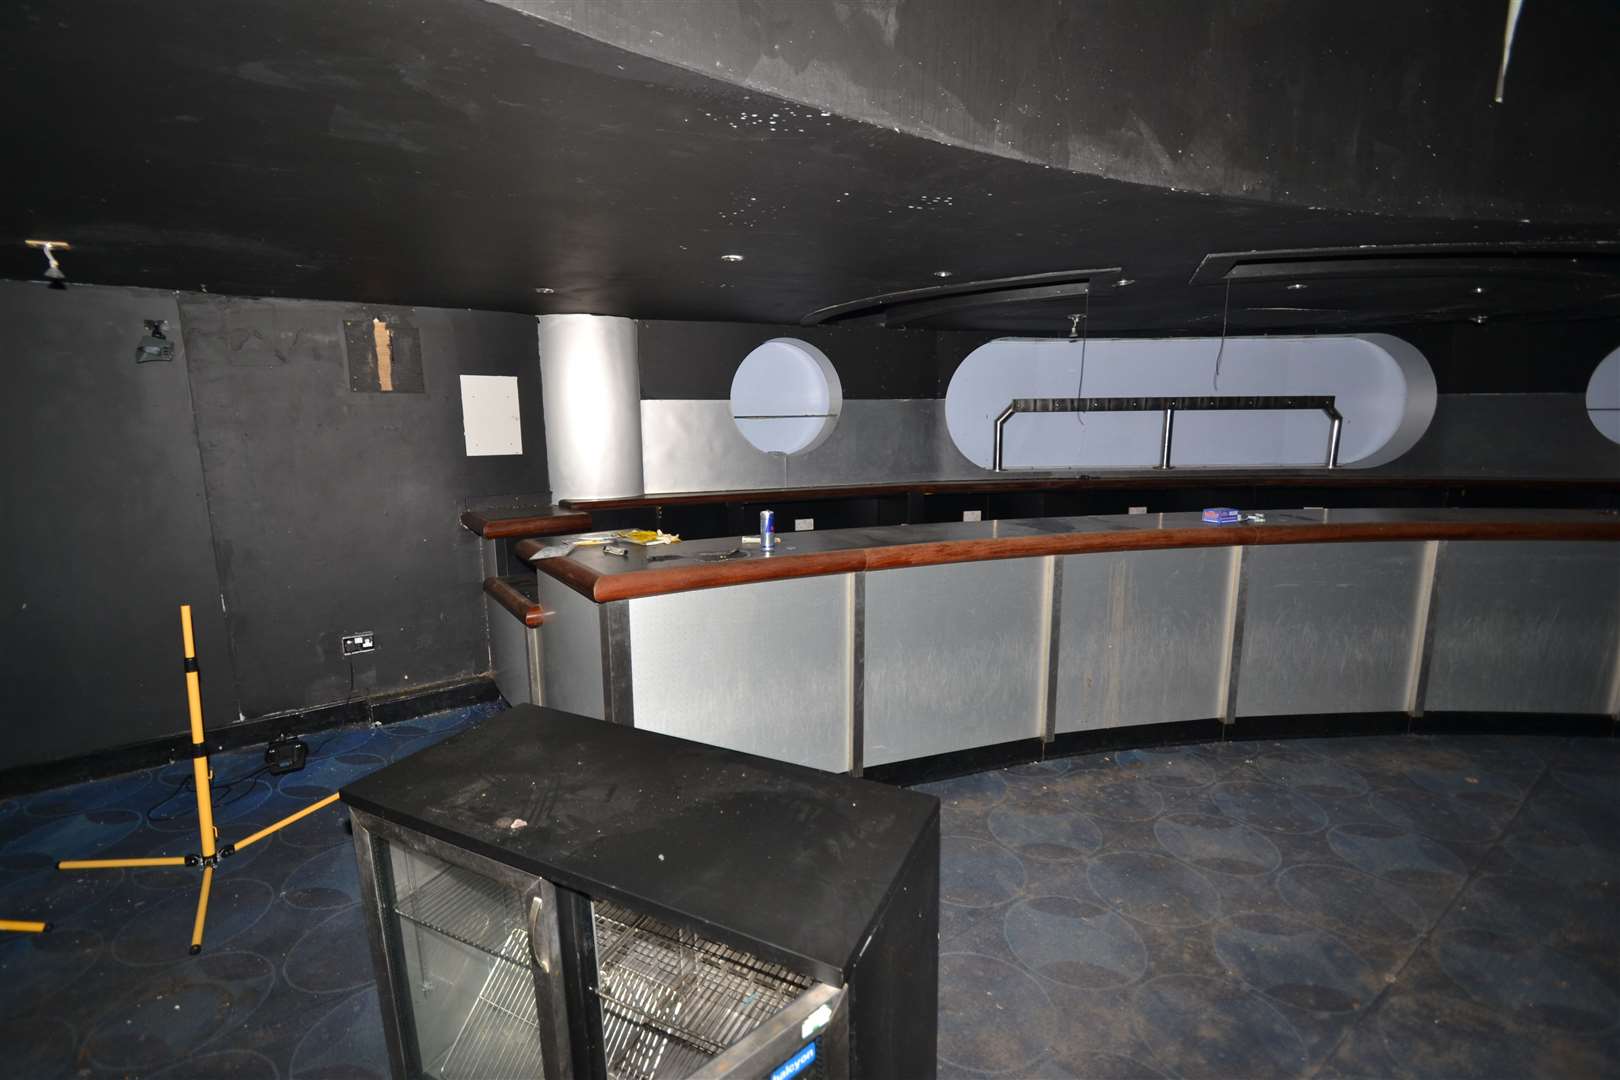 The Liquid club underwent a £500,000 facelift in 2007